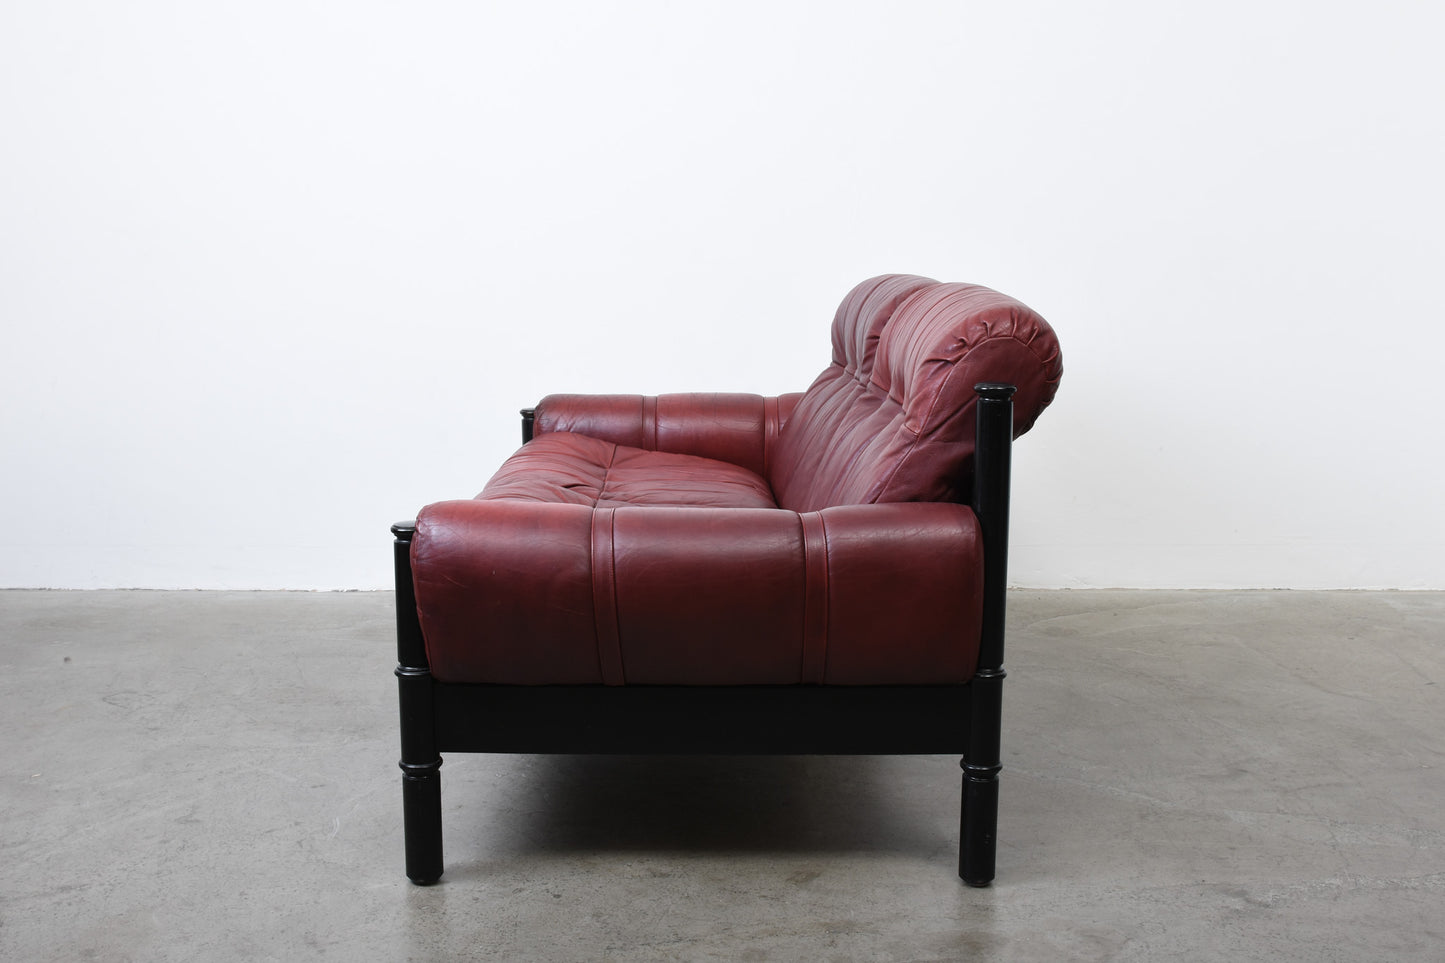 1960s Swedish leather two seater